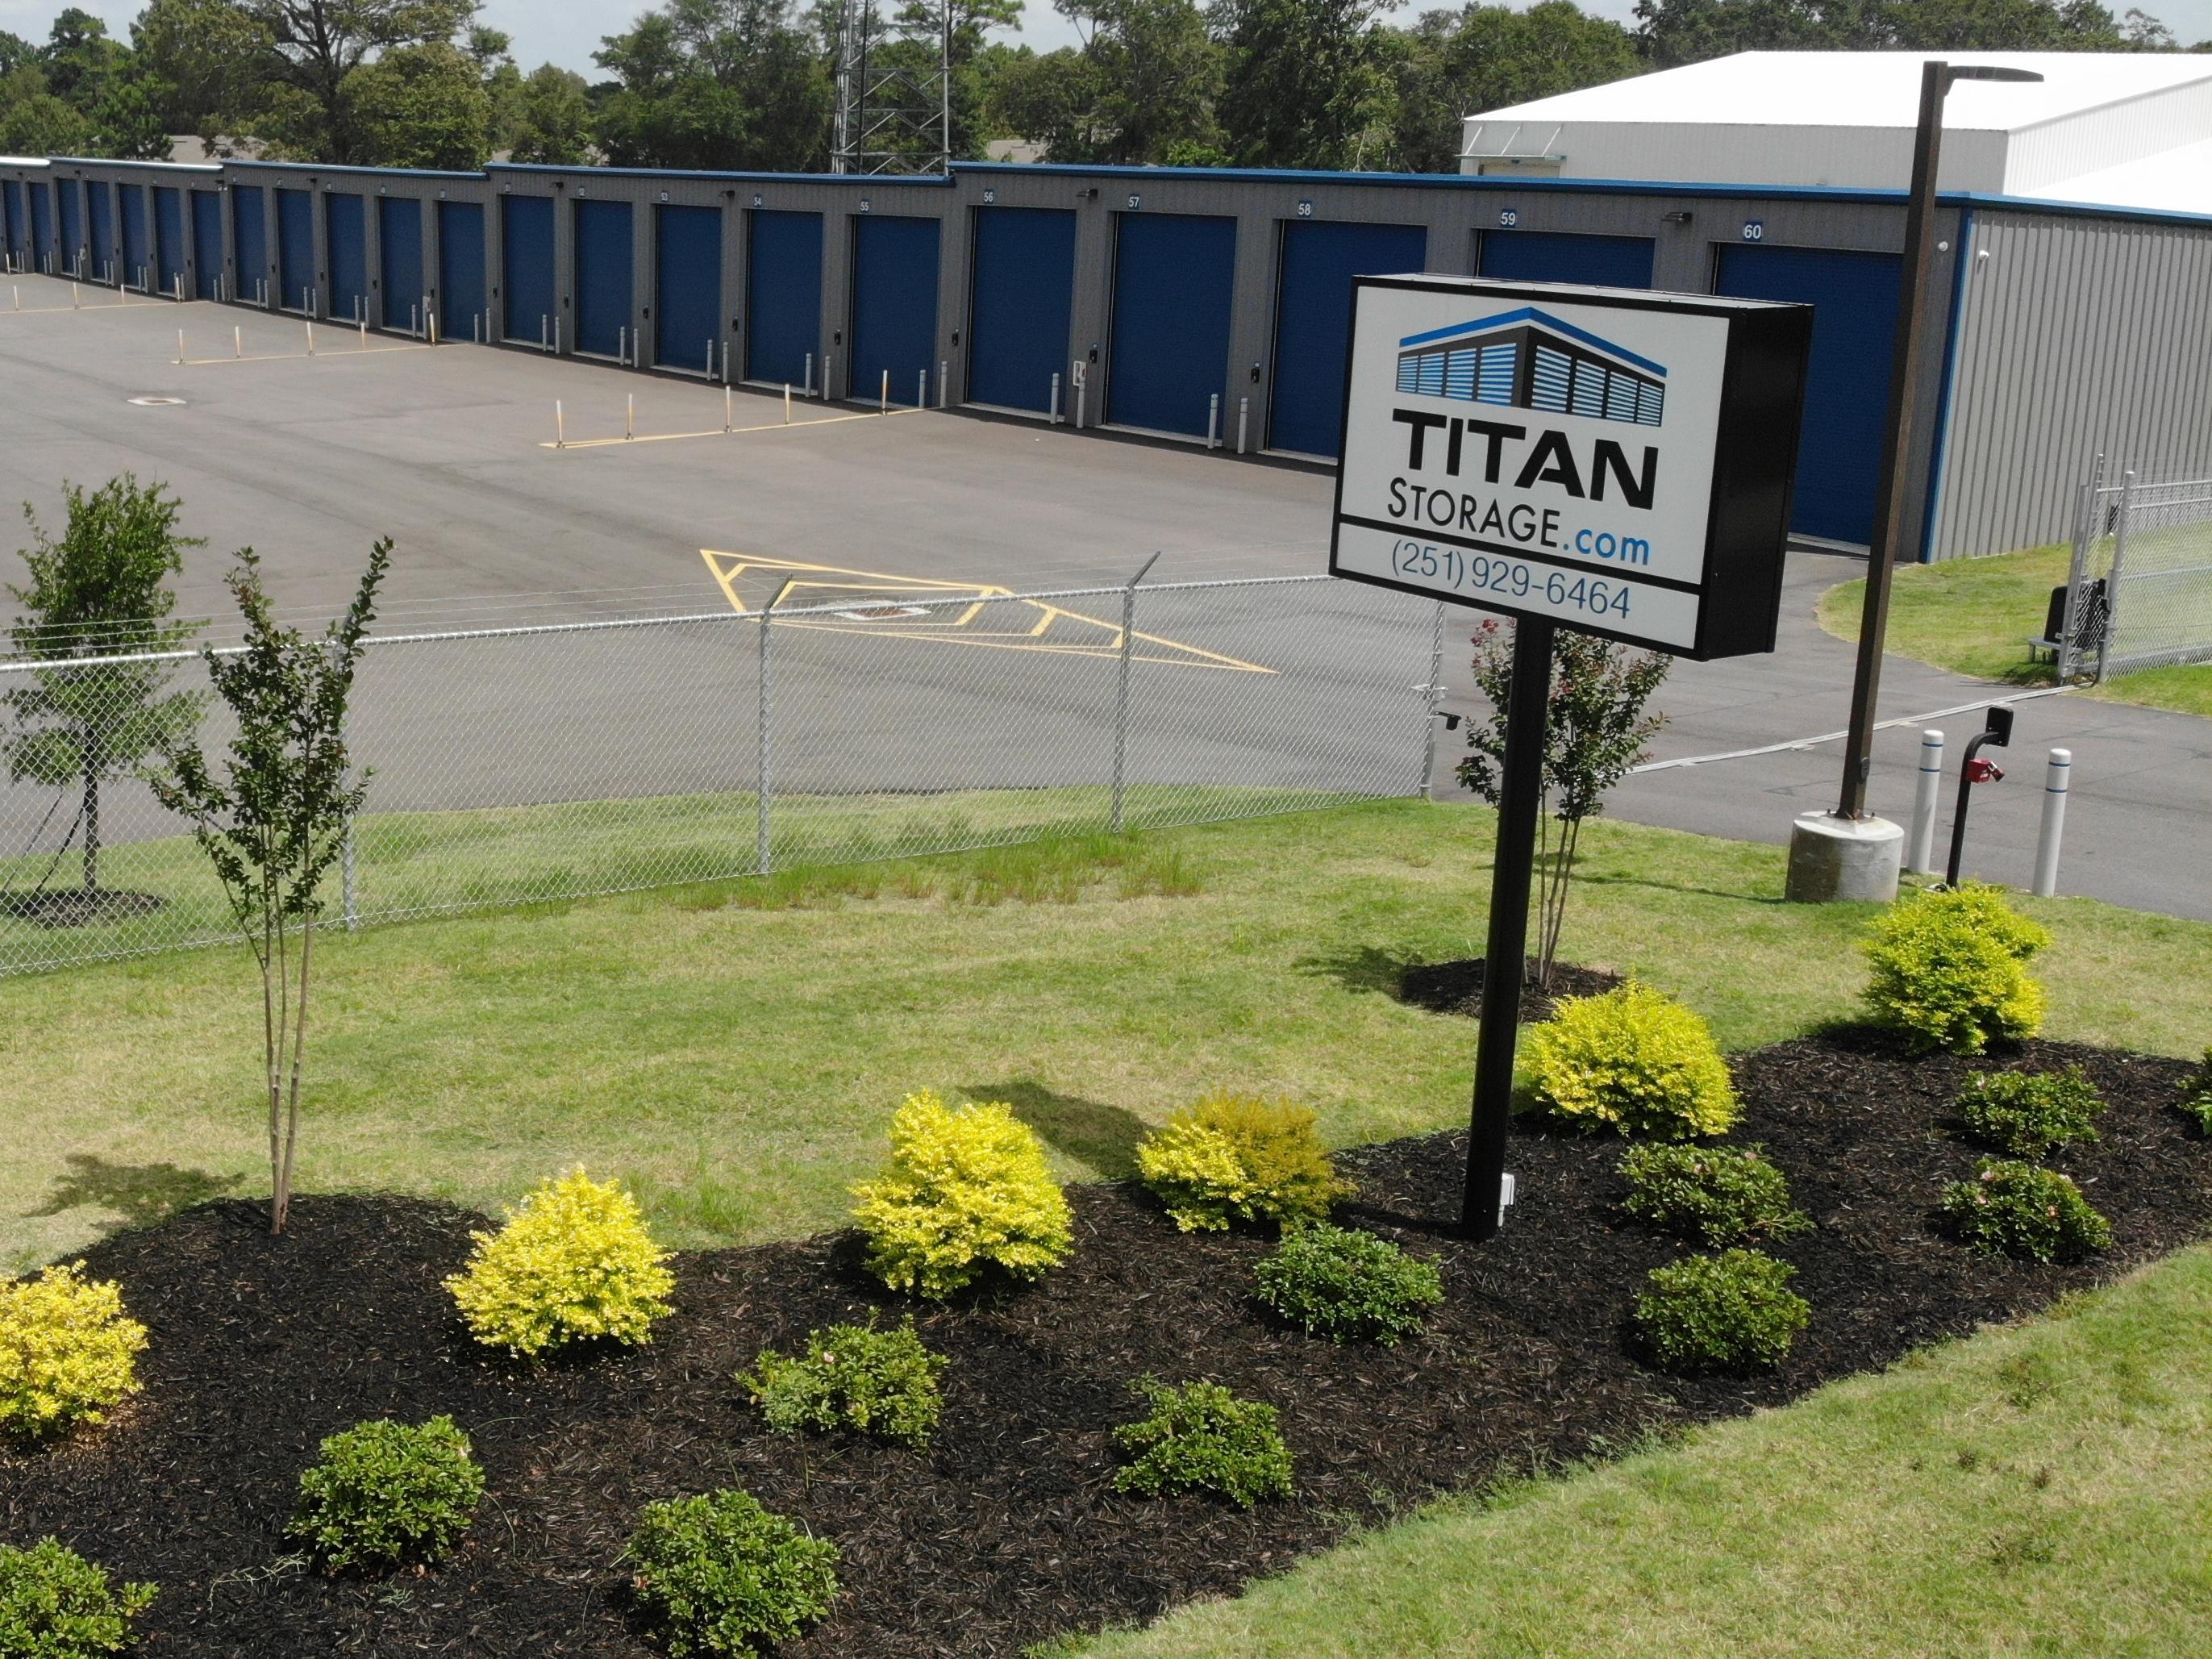 GET IN TOUCH WITH TITAN STORAGE FOR YOUR Mobile, AL OVERSIZED HOME GOODS STORAGE UNIT SOLUTION